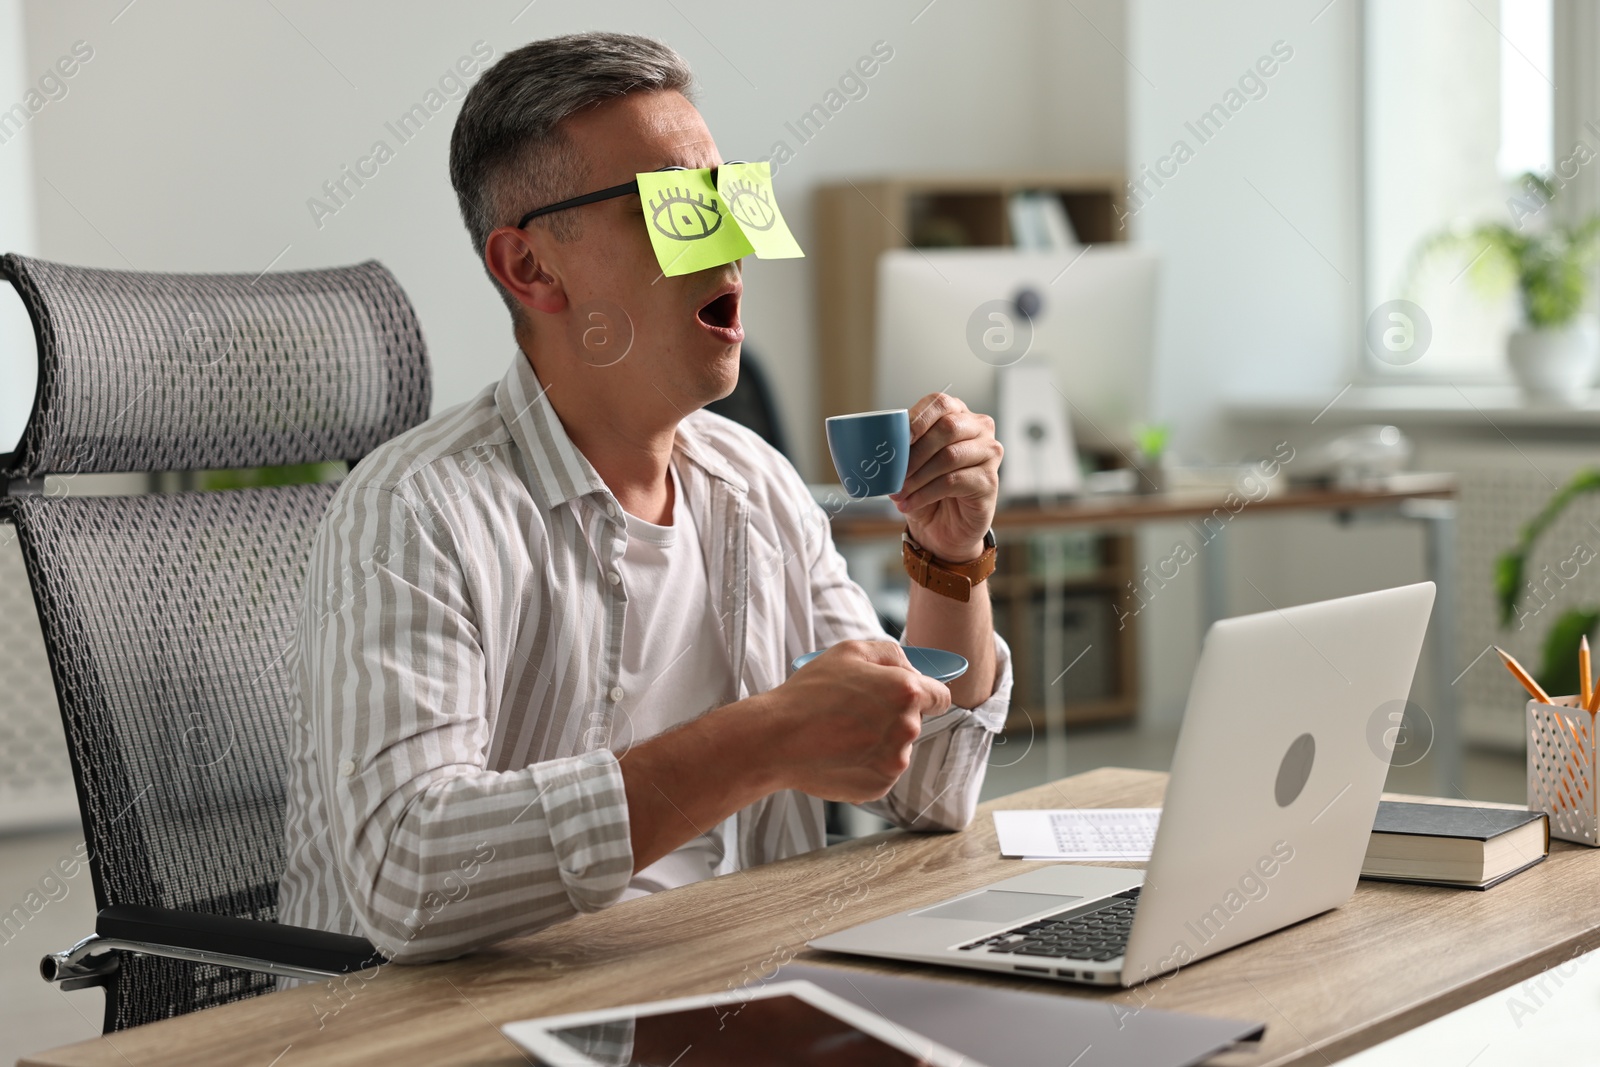 Photo of Man with fake eyes painted on sticky notes holding cup of drink and yawning at workplace in office